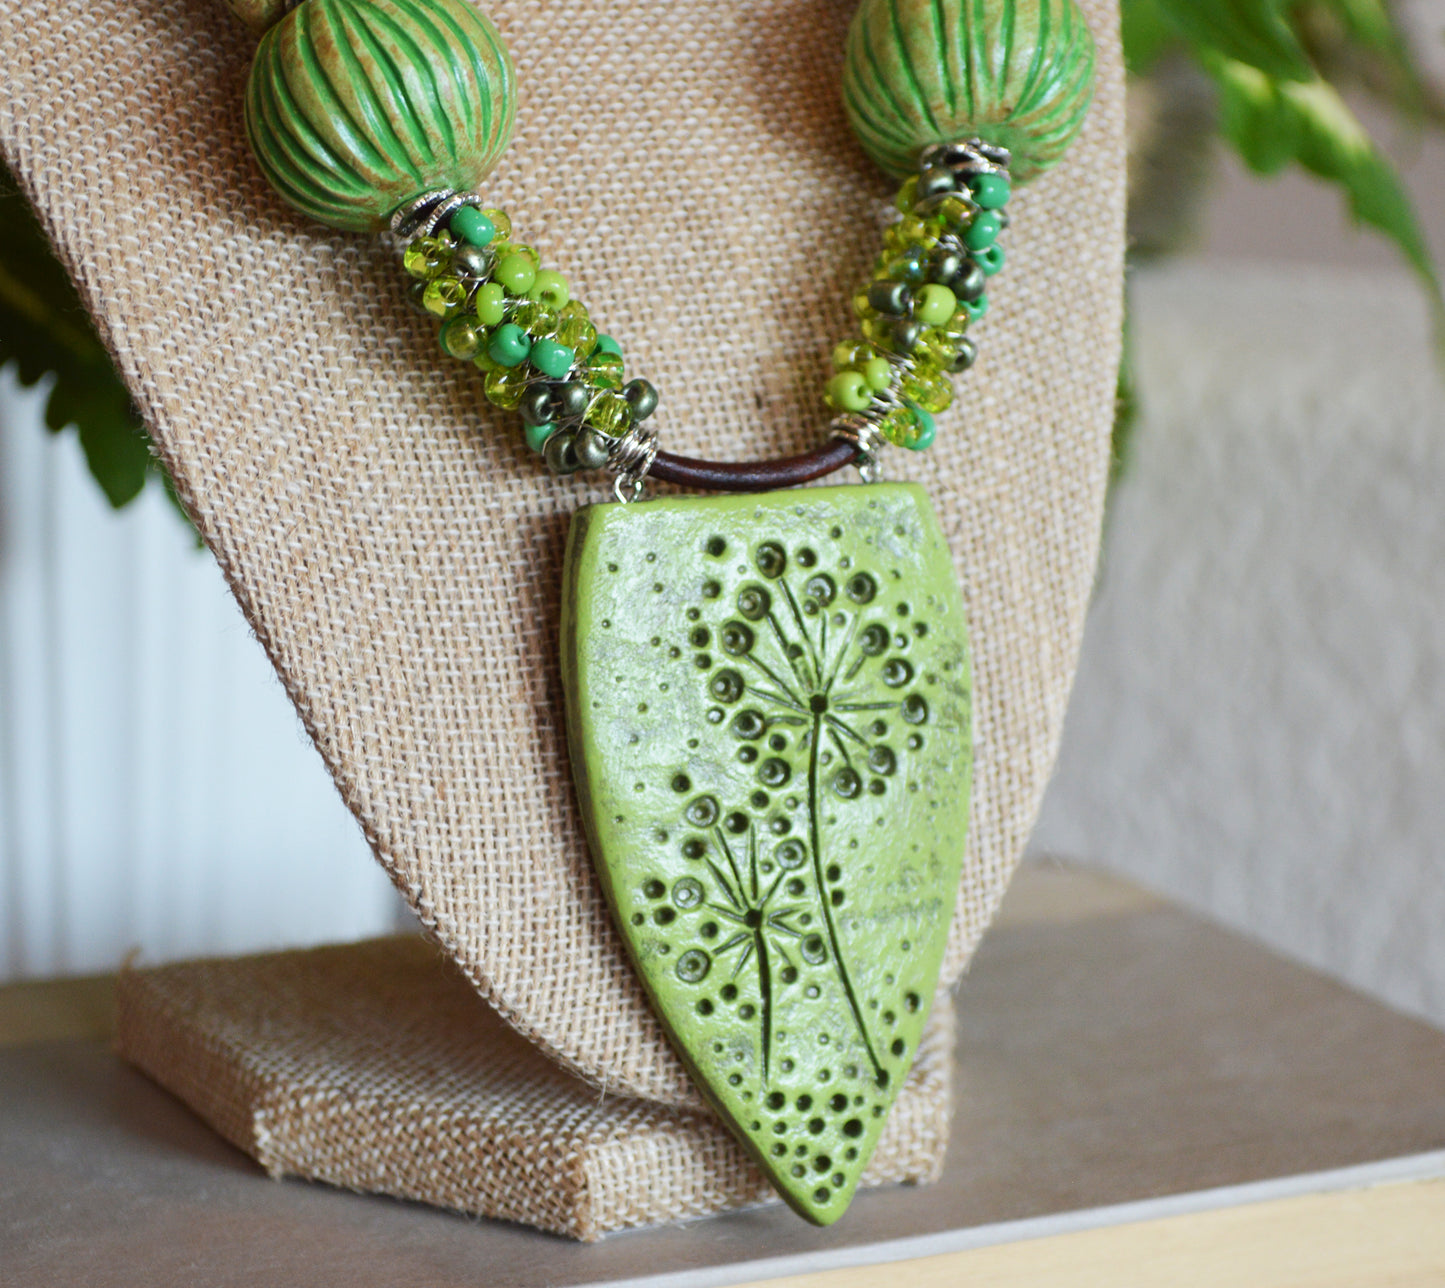 One of a kind statement beaded polymer clay pendant necklace / earthy green tones